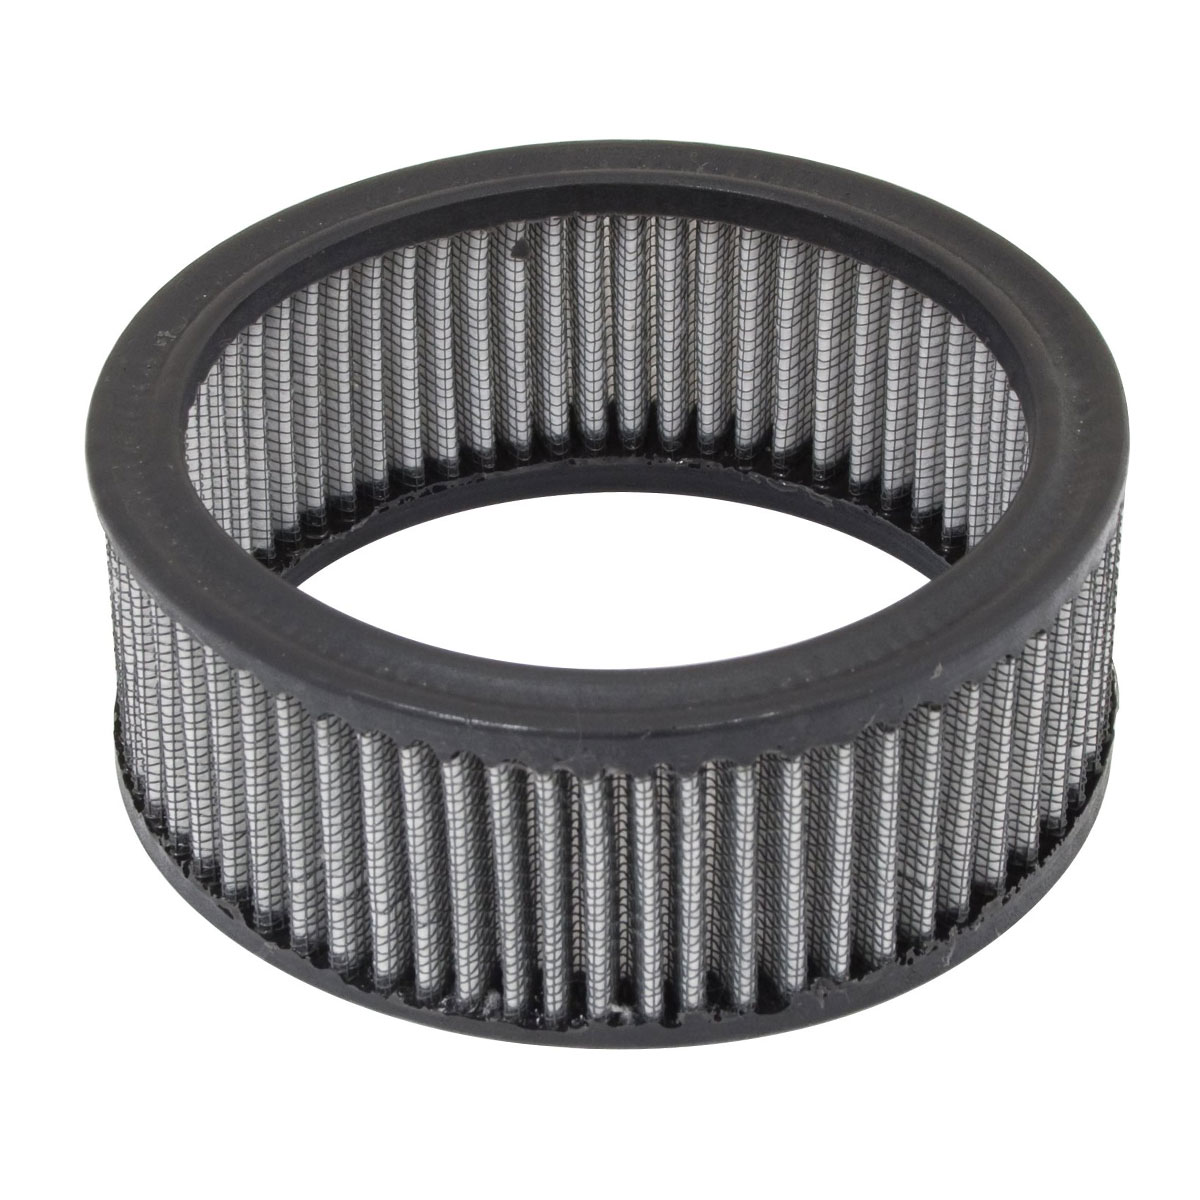 Replacement VW Air Cleaner Filter Element - High Flow - Round 5.5" Diameter - 2" High